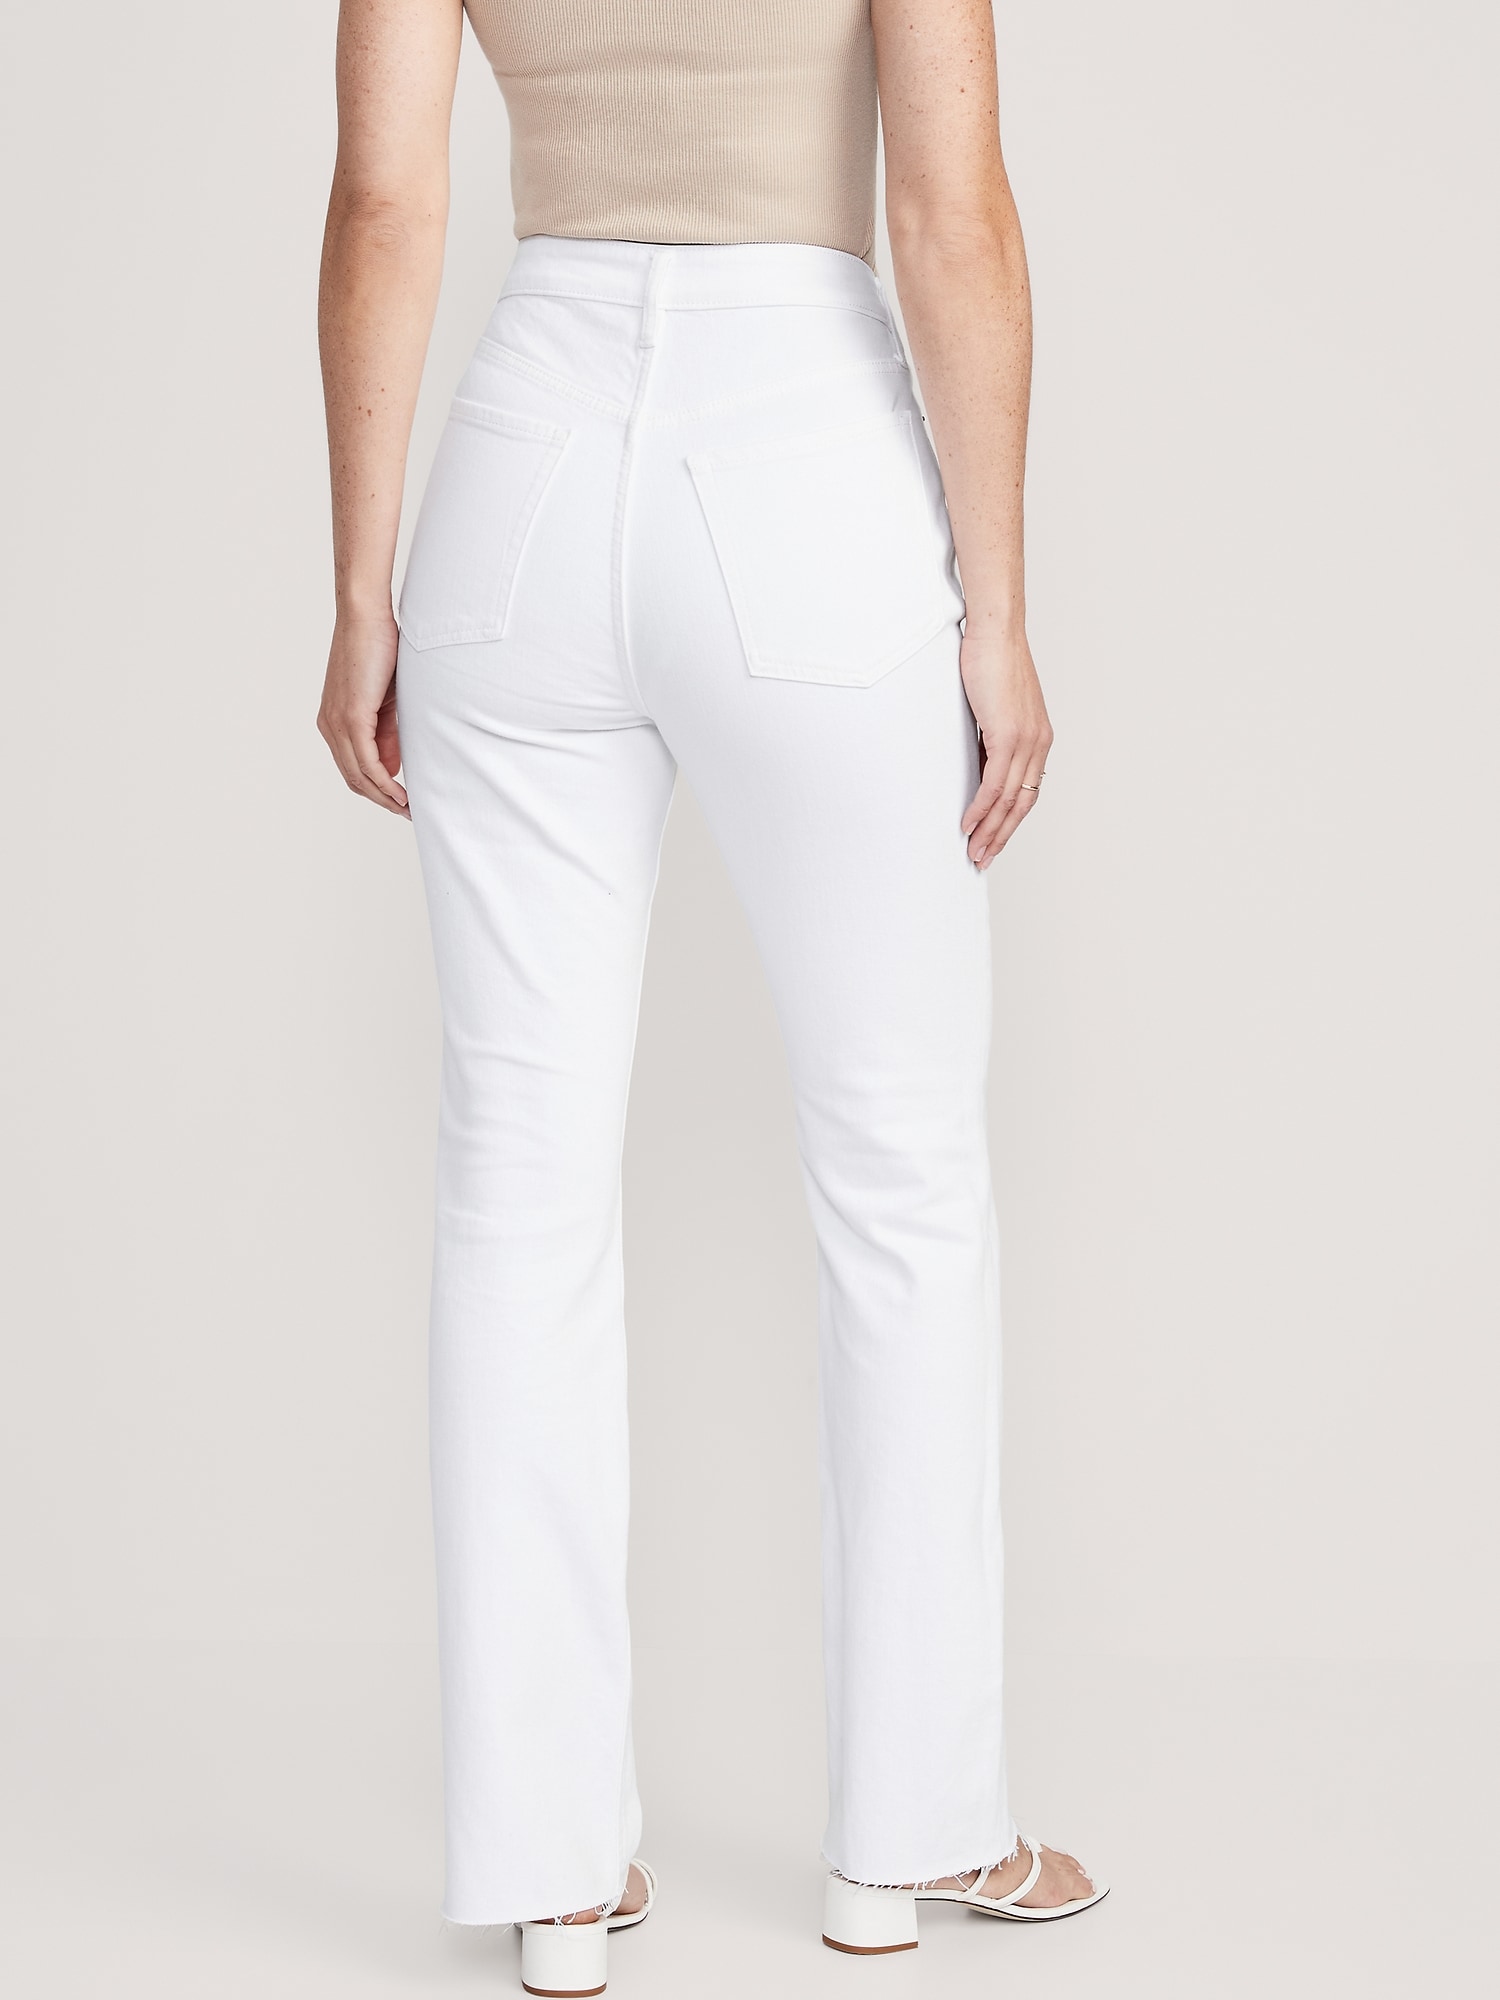 Extra High-Waisted Button-Fly White-Wash Cut-Off Kicker Boot-Cut Jeans ...